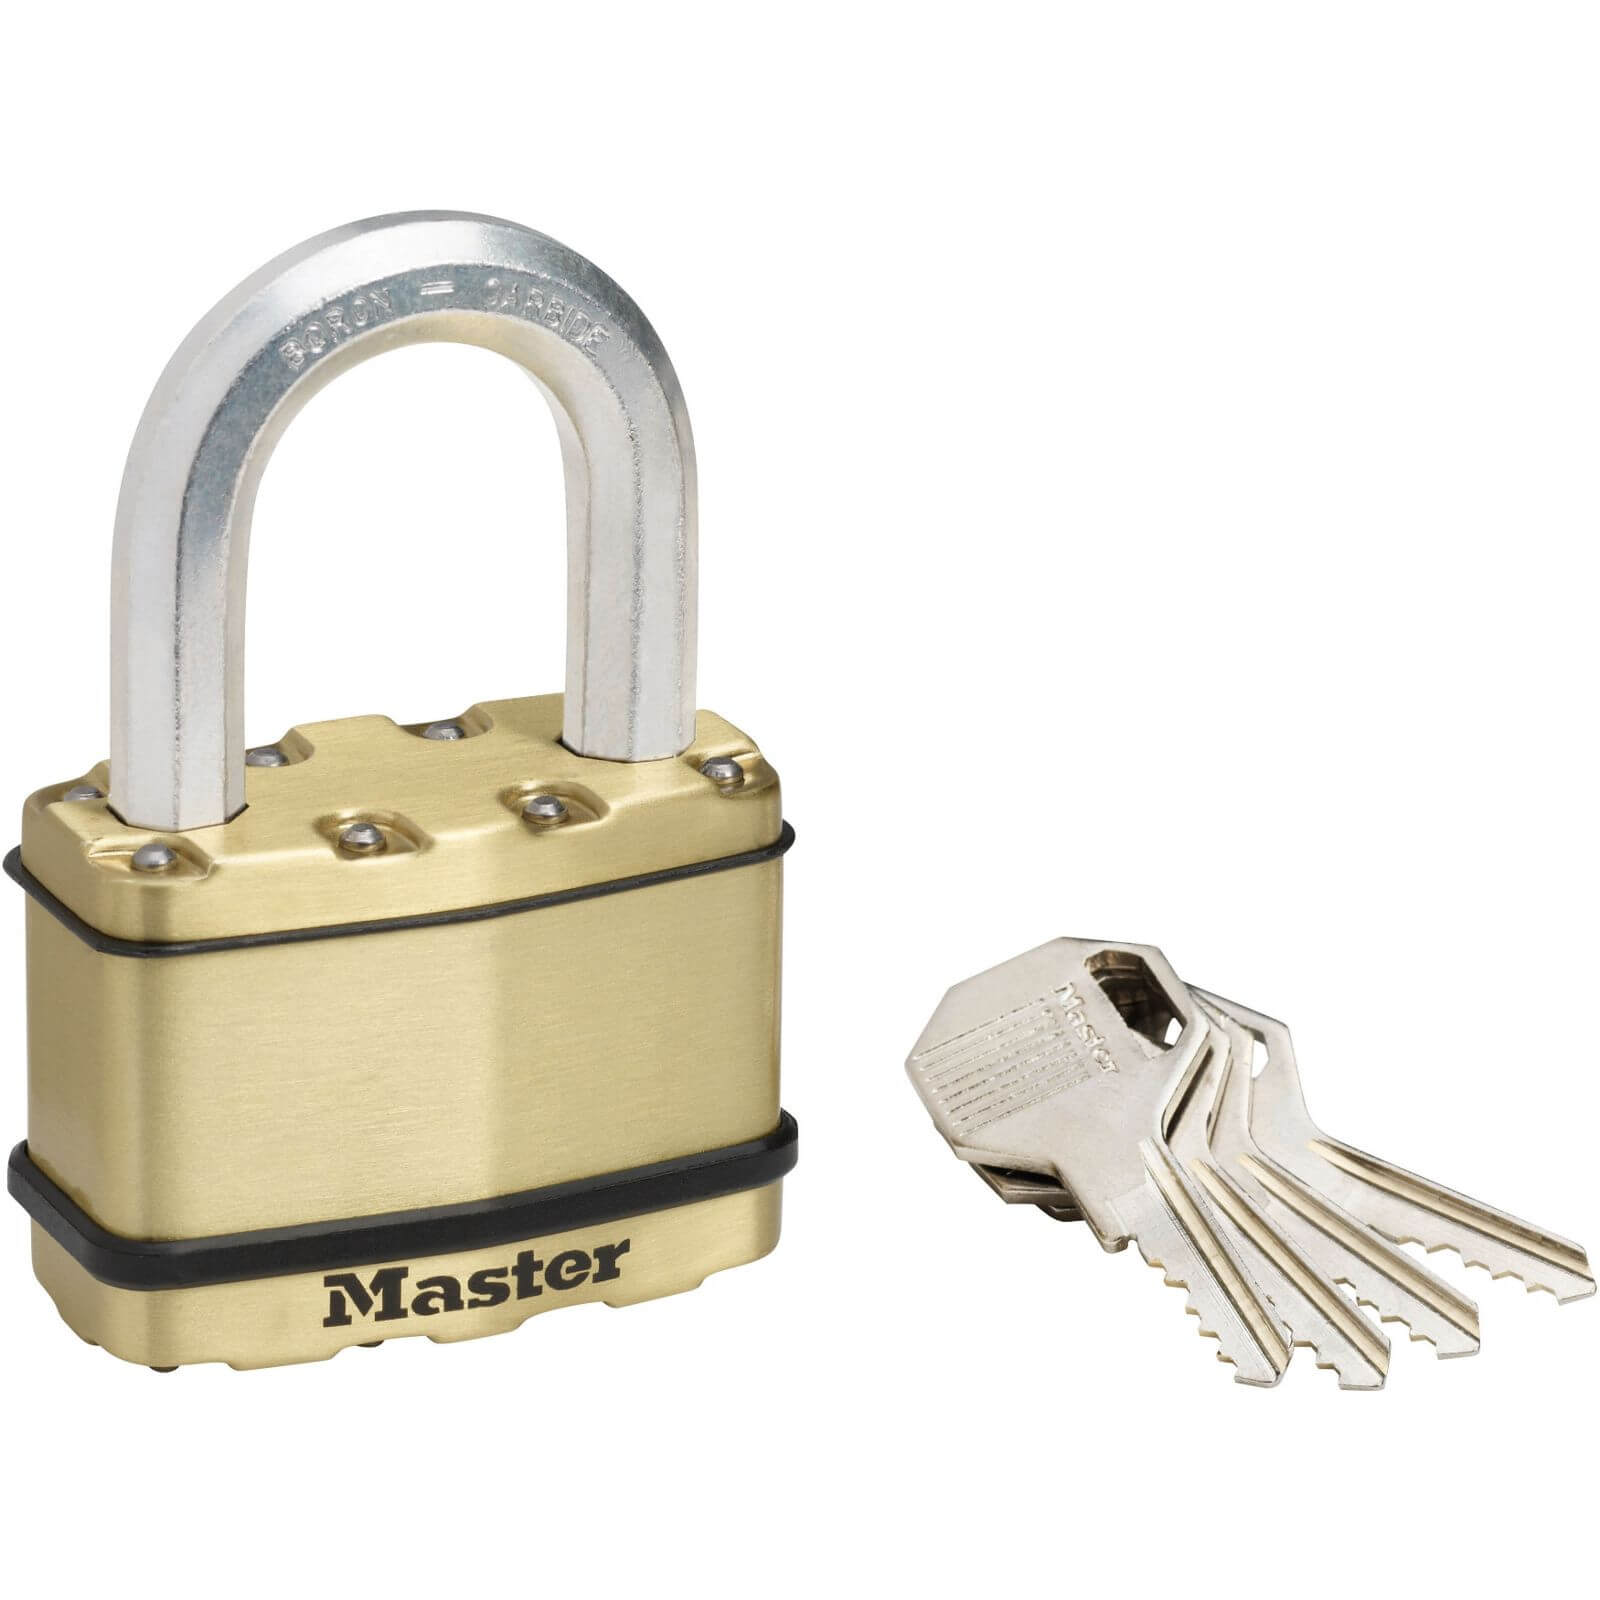 Master Lock Excell Laminated Steel Padlock with Brass Finish - 64mm